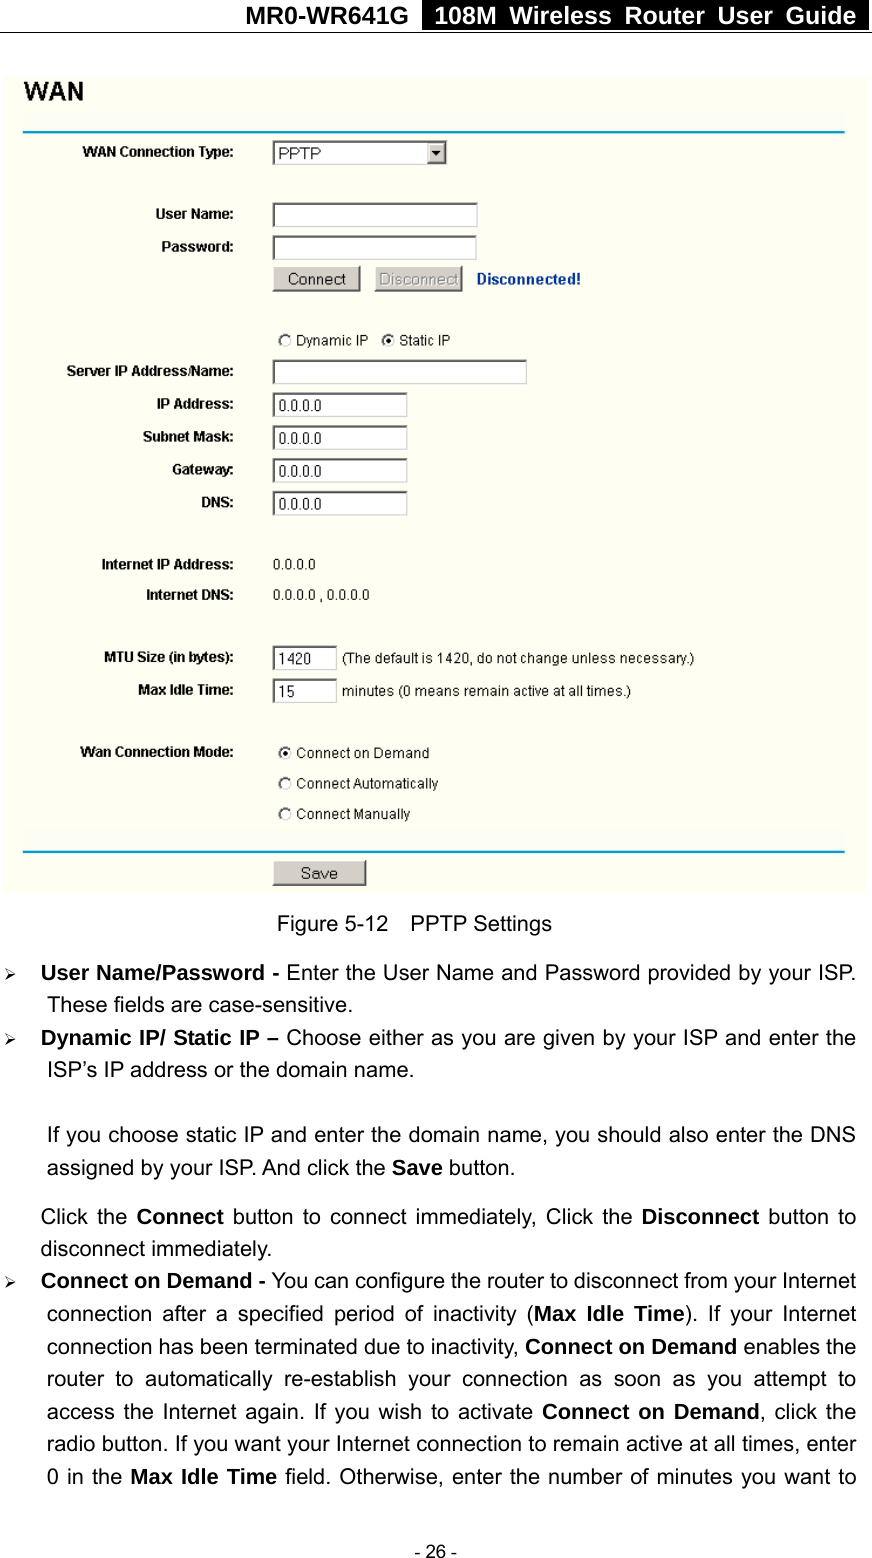 MR0-WR641G   108M Wireless Router User Guide   Figure 5-12  PPTP Settings ¾ User Name/Password - Enter the User Name and Password provided by your ISP. These fields are case-sensitive. ¾ Dynamic IP/ Static IP – Choose either as you are given by your ISP and enter the ISP’s IP address or the domain name.  If you choose static IP and enter the domain name, you should also enter the DNS assigned by your ISP. And click the Save button. Click the Connect button to connect immediately, Click the Disconnect button to disconnect immediately. ¾ Connect on Demand - You can configure the router to disconnect from your Internet connection after a specified period of inactivity (Max Idle Time). If your Internet connection has been terminated due to inactivity, Connect on Demand enables the router to automatically re-establish your connection as soon as you attempt to access the Internet again. If you wish to activate Connect on Demand, click the radio button. If you want your Internet connection to remain active at all times, enter 0 in the Max Idle Time field. Otherwise, enter the number of minutes you want to  - 26 - 